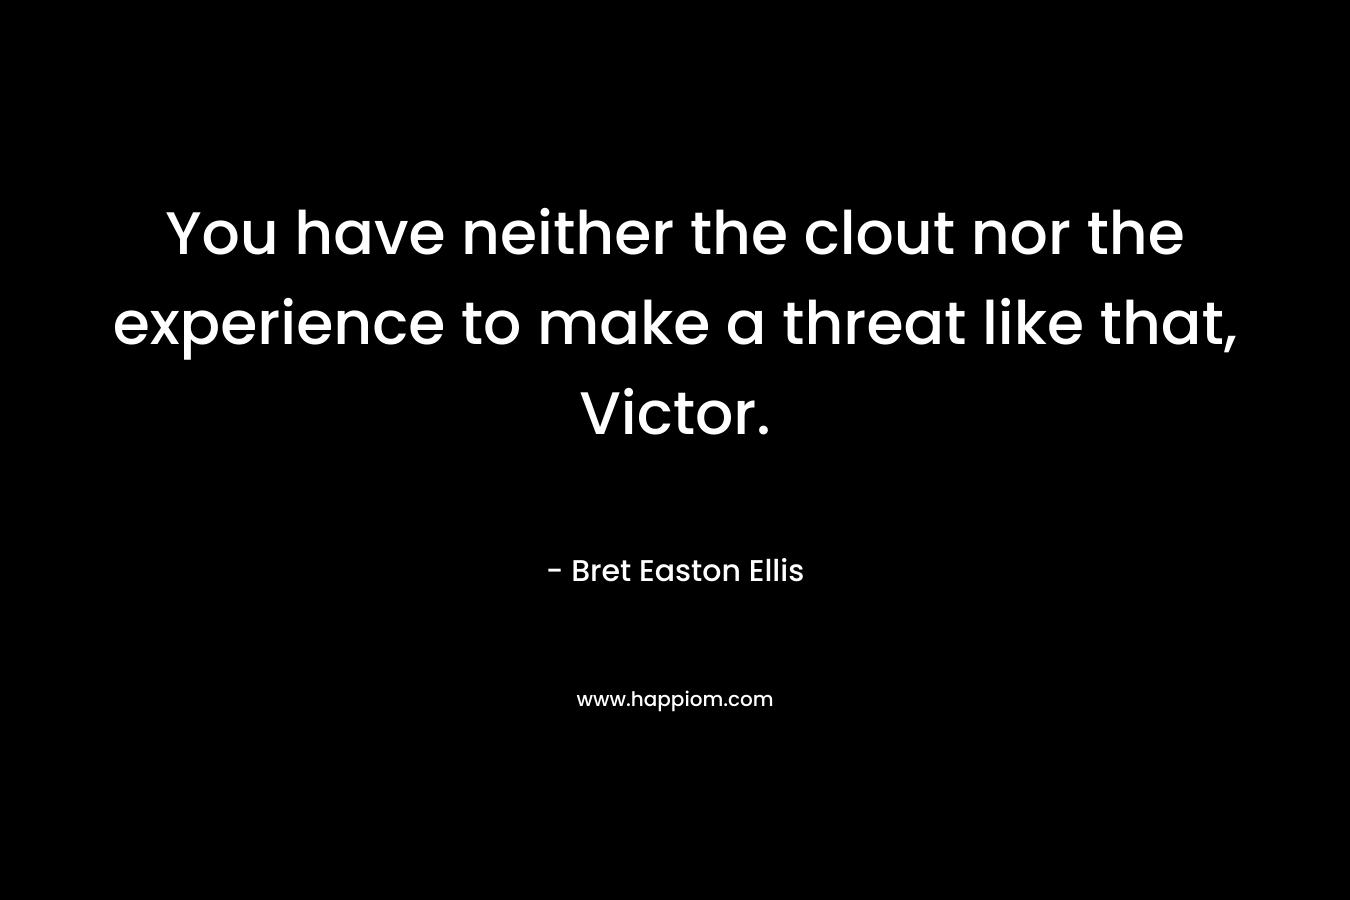 You have neither the clout nor the experience to make a threat like that, Victor. – Bret Easton Ellis